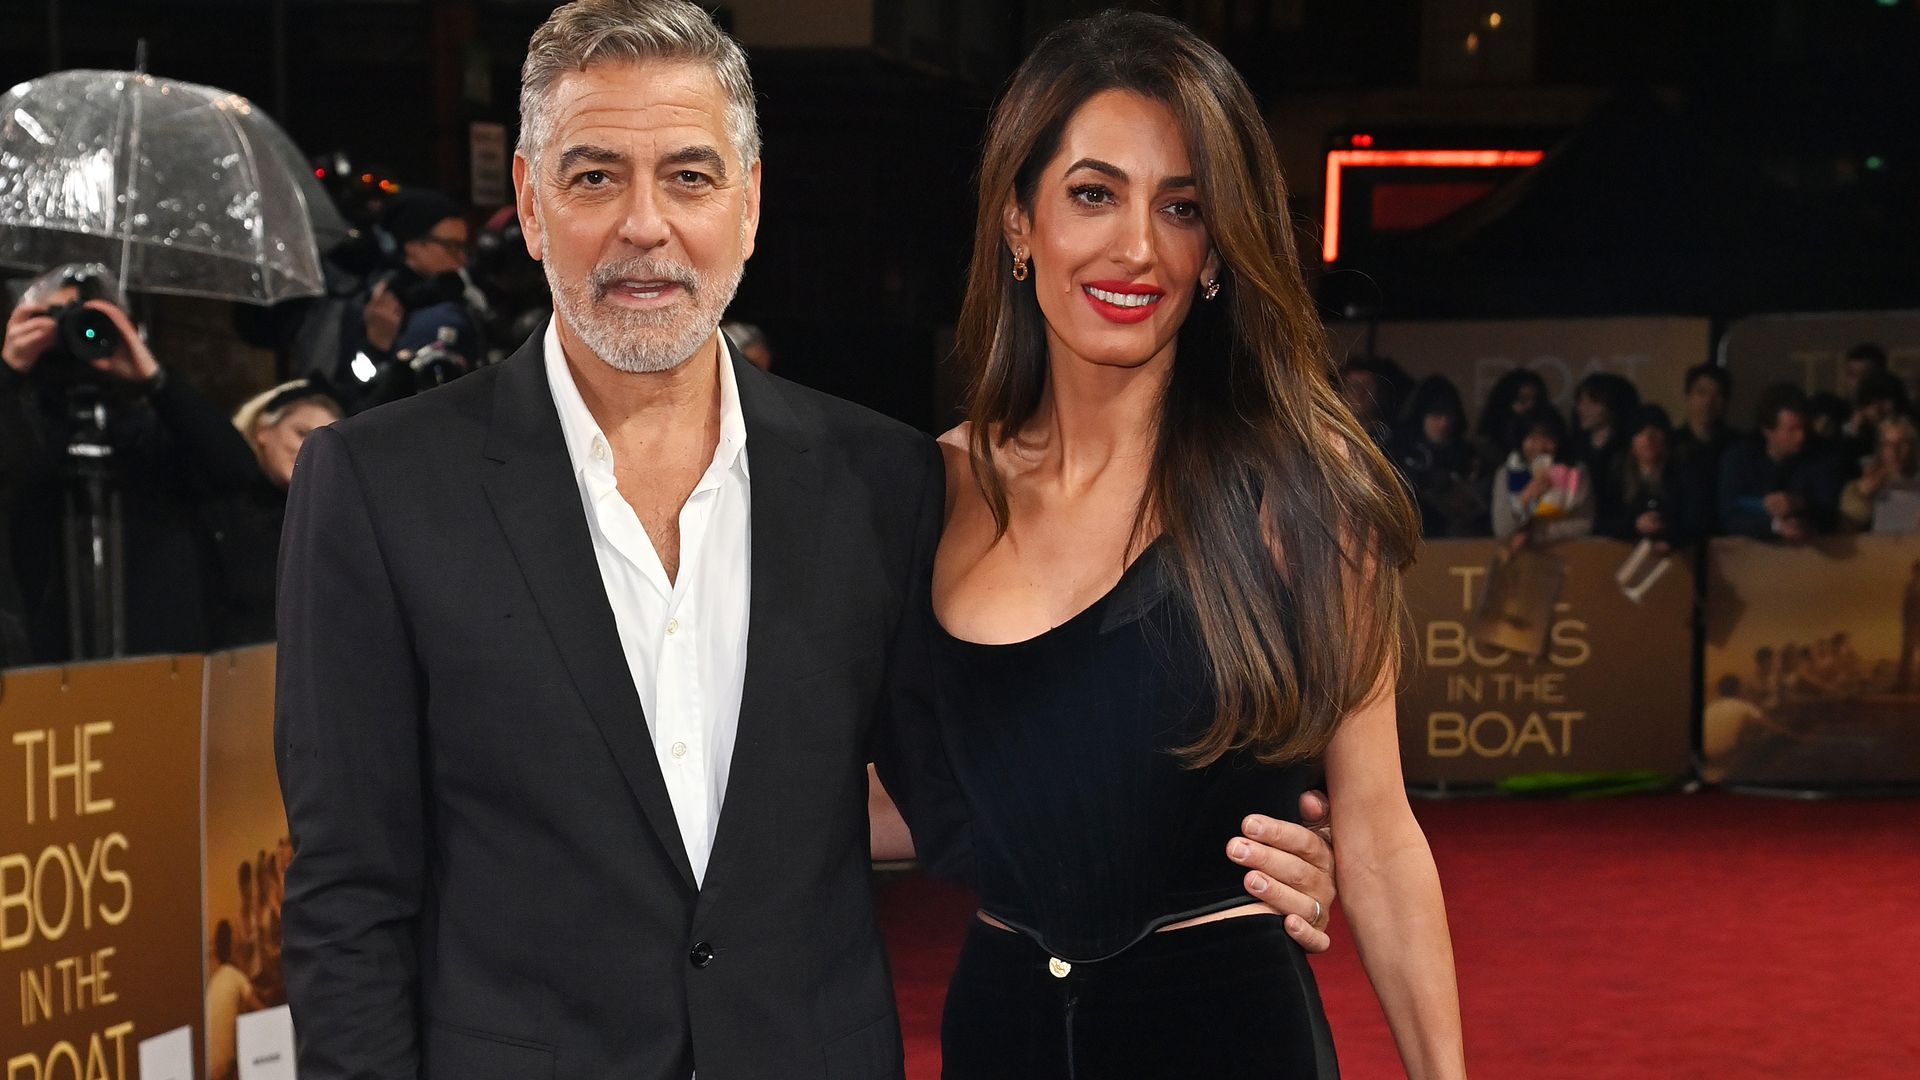 George Clooney's $18 million mansion he shares with Amal and twins is flooded in heartbreaking photos